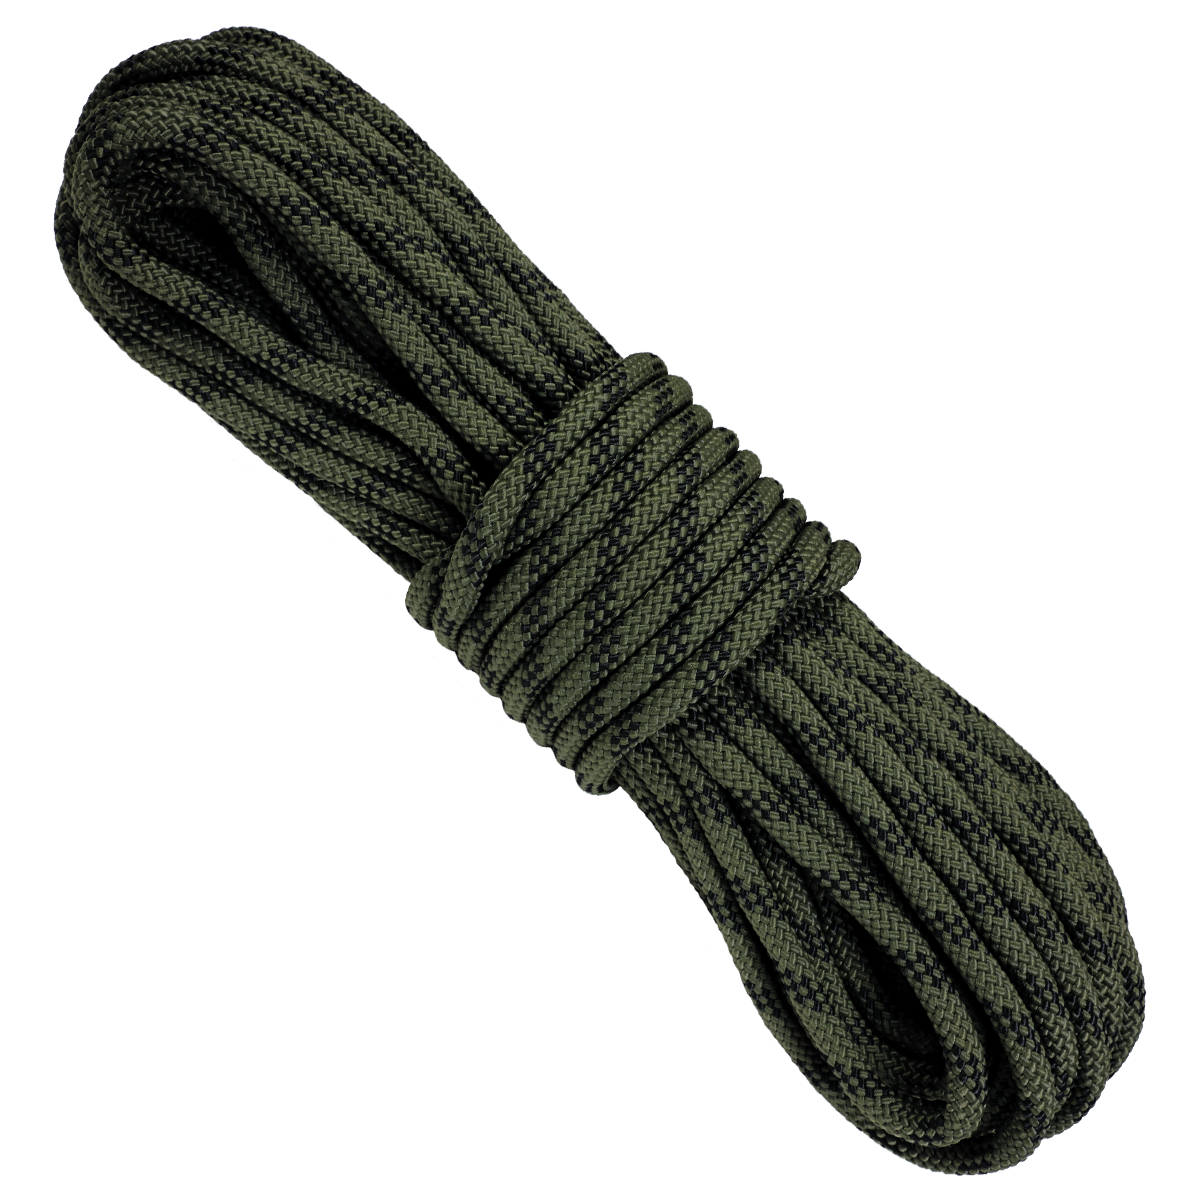 Atwood Rope 50 ft. Braided Utility Rope - Camo